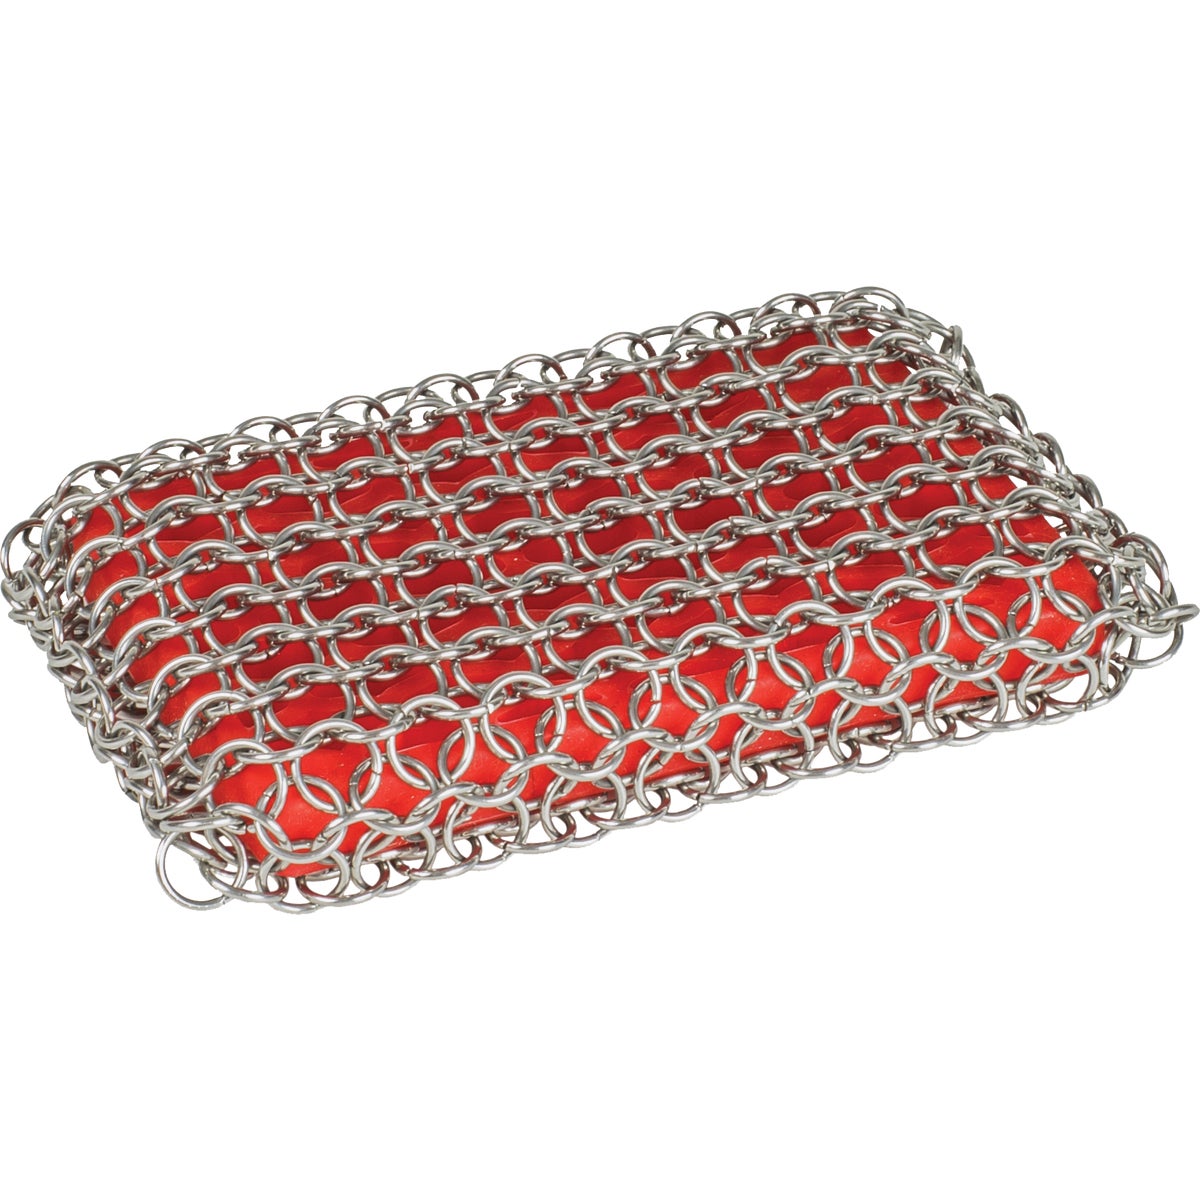 Item 603100, Stainless steel chainmail rings create a textured surface that is ideal for